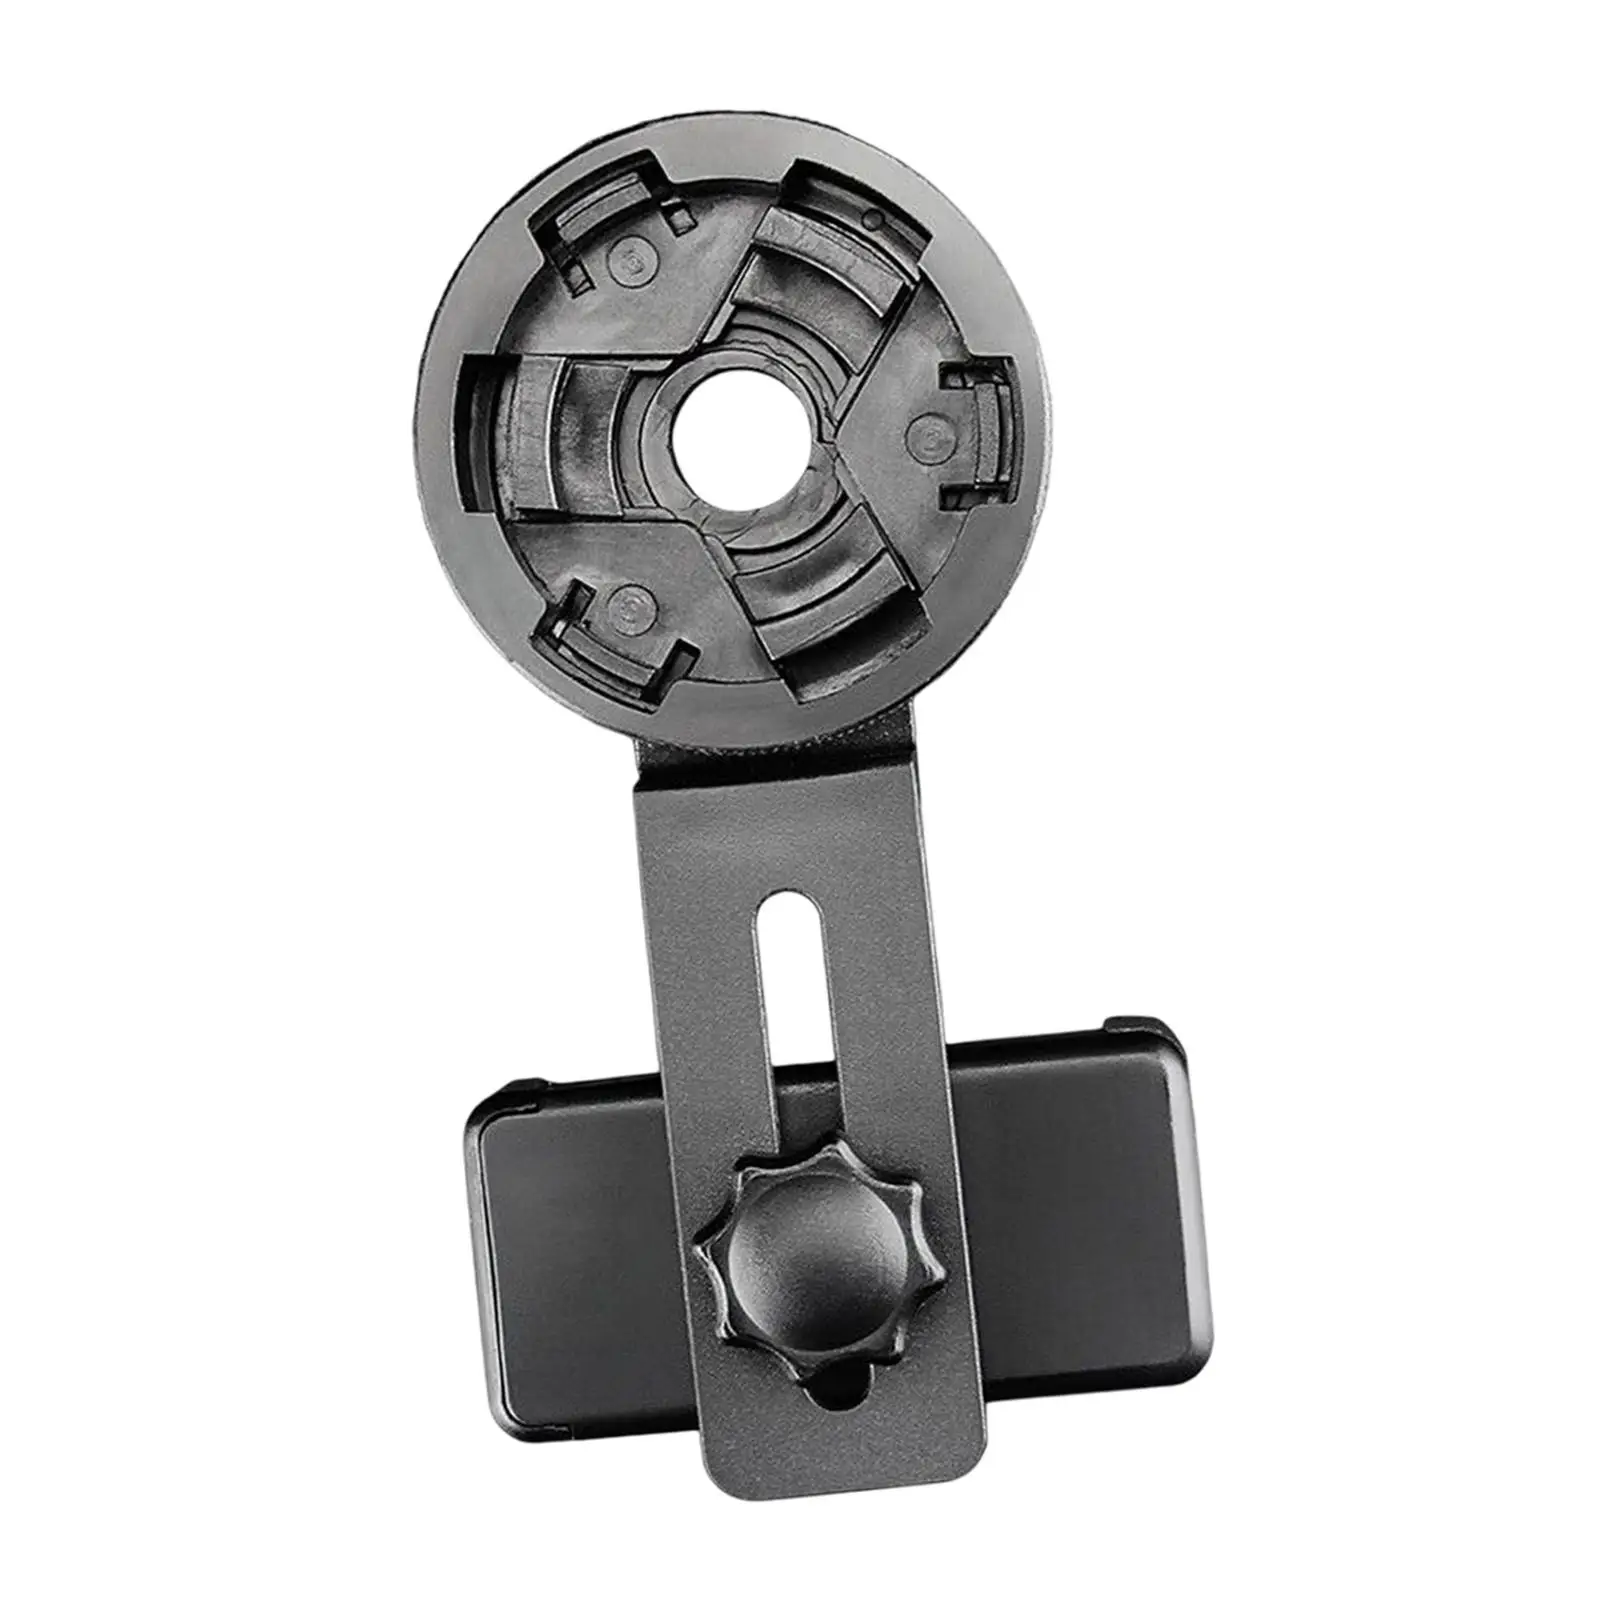 Cellphone Telescope Adapter Mount Bracket for Fits Almost All Smartphones